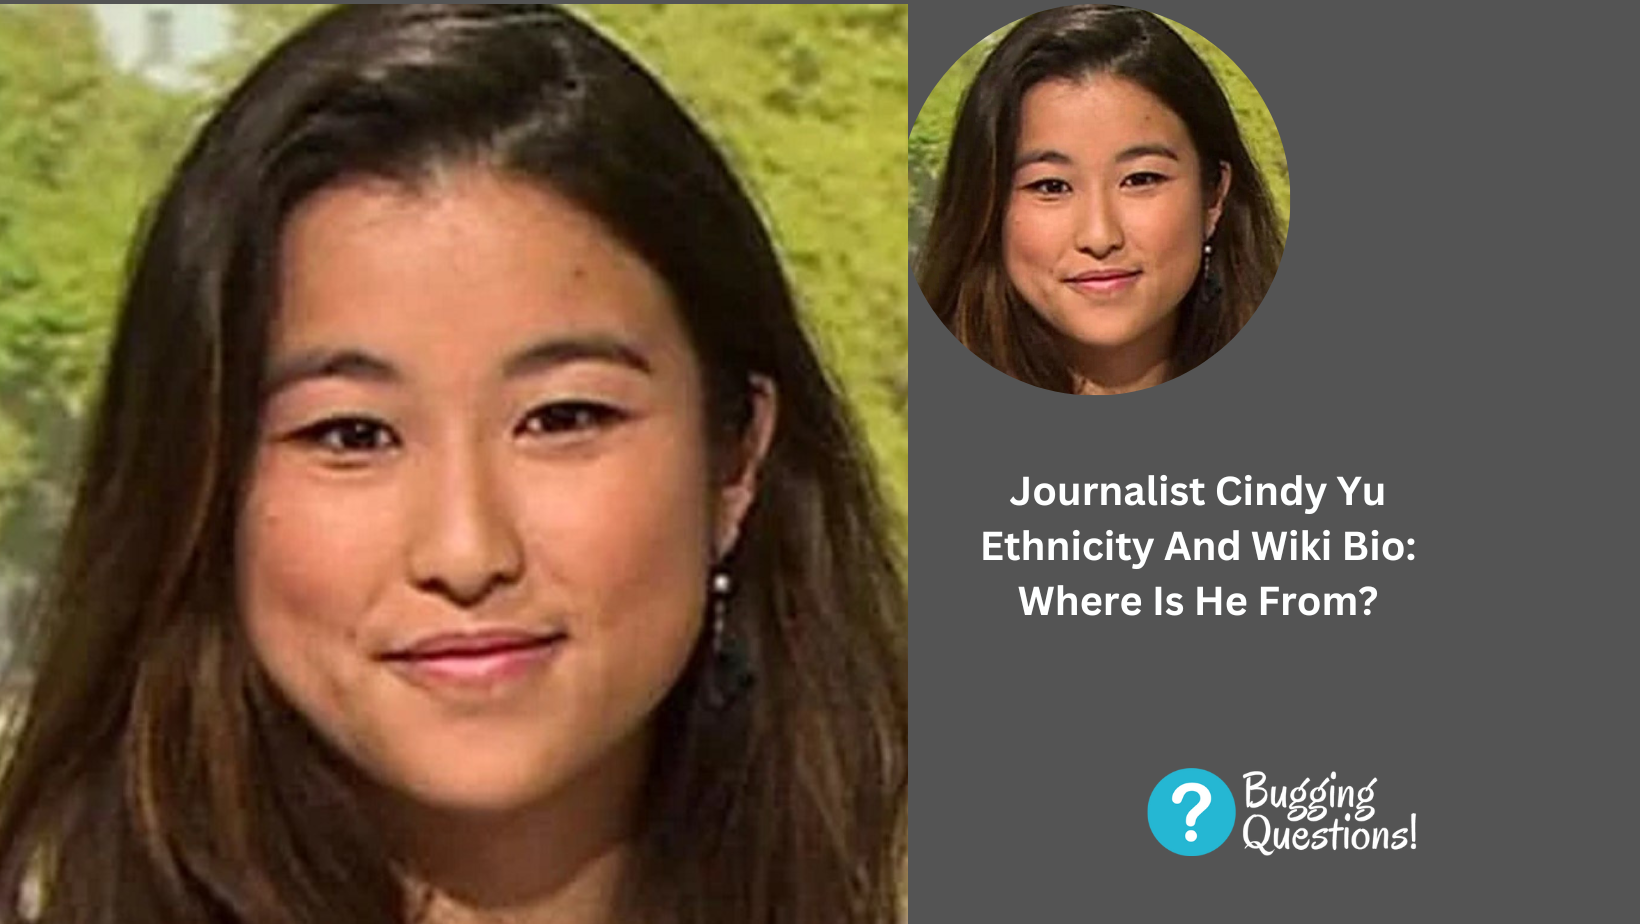 Journalist Cindy Yu Ethnicity And Wiki Bio: Where Is He From?